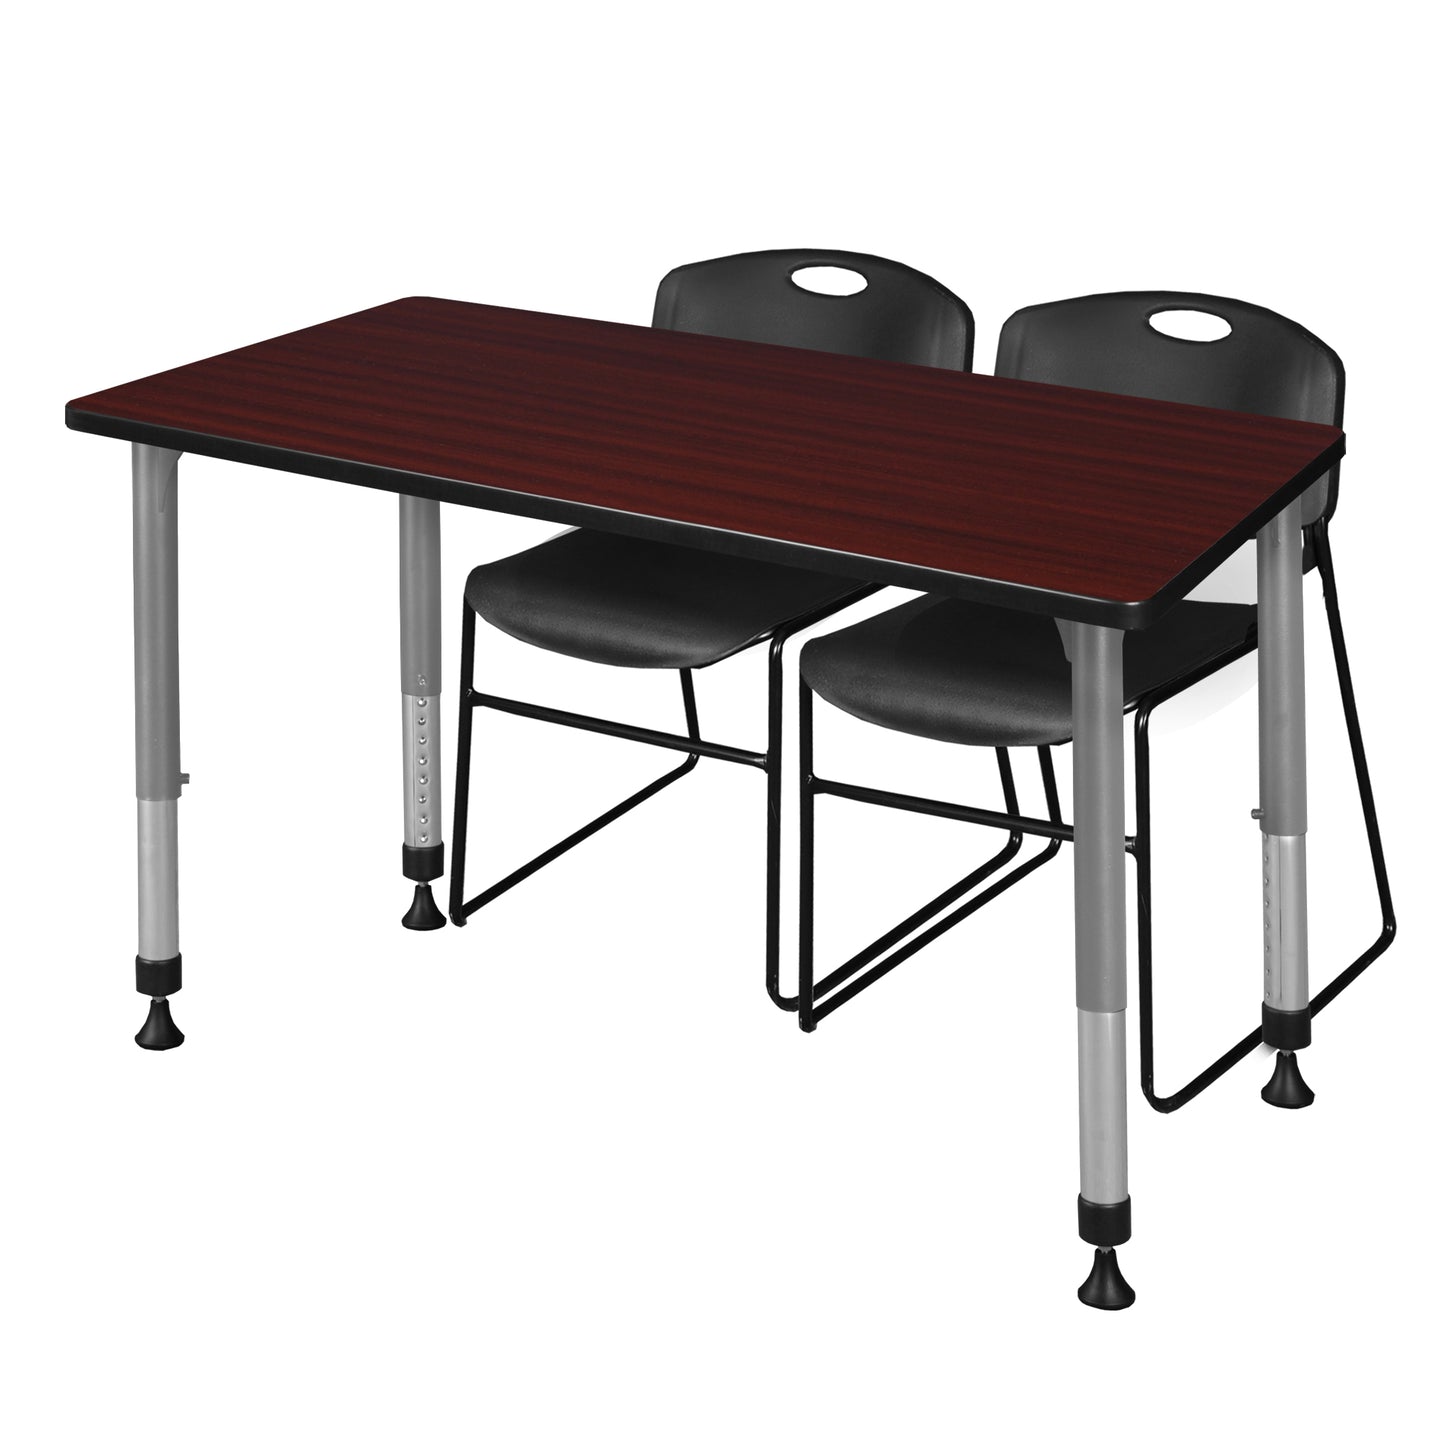 Regency Kee 48 x 30 in. Adjustable Classroom Table & 2 Zeng Stack Chairs